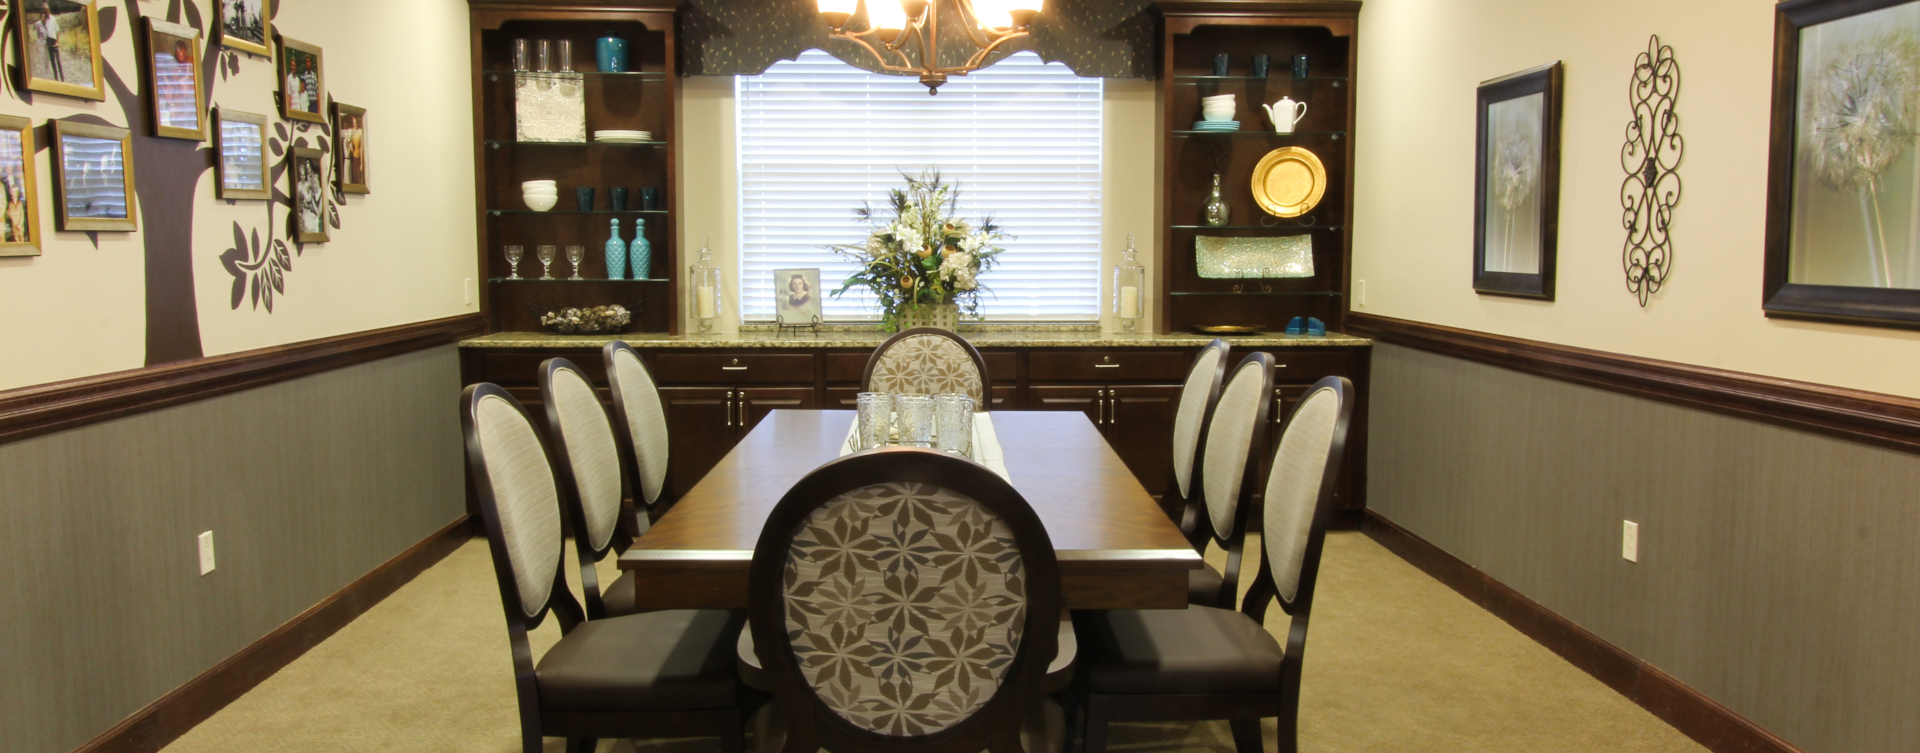 Food is best when shared with family and friends in the private dining room at Bickford of Tinley Park